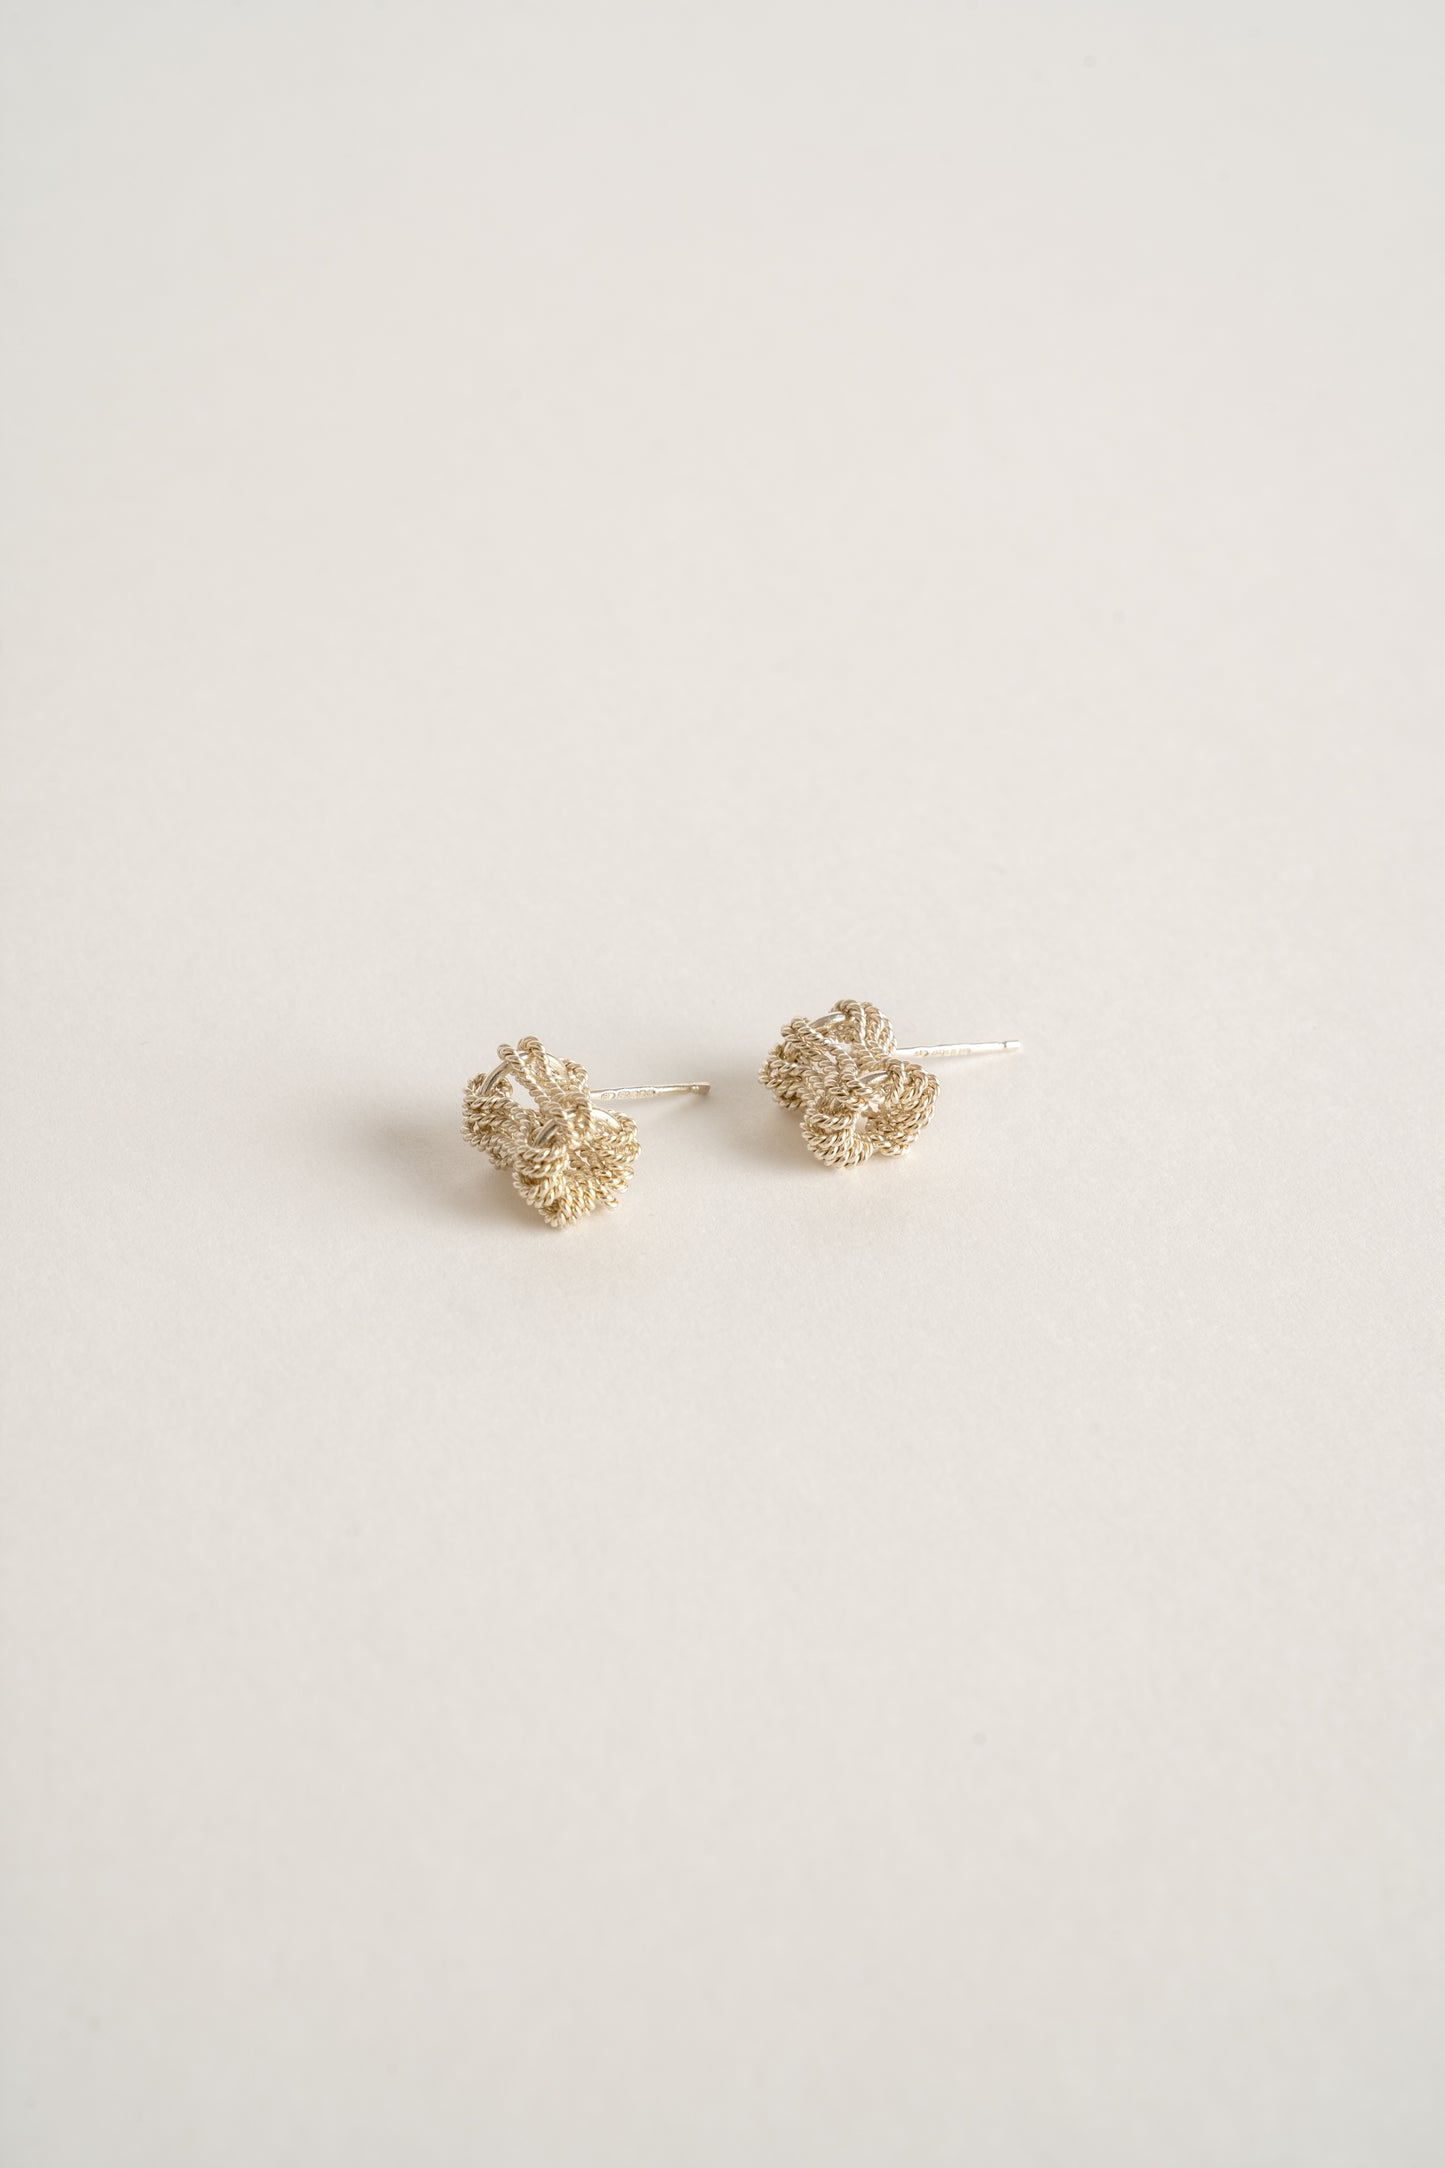 Ruth Leslie Recycled Sterling Silver Heddle Stud Earrings